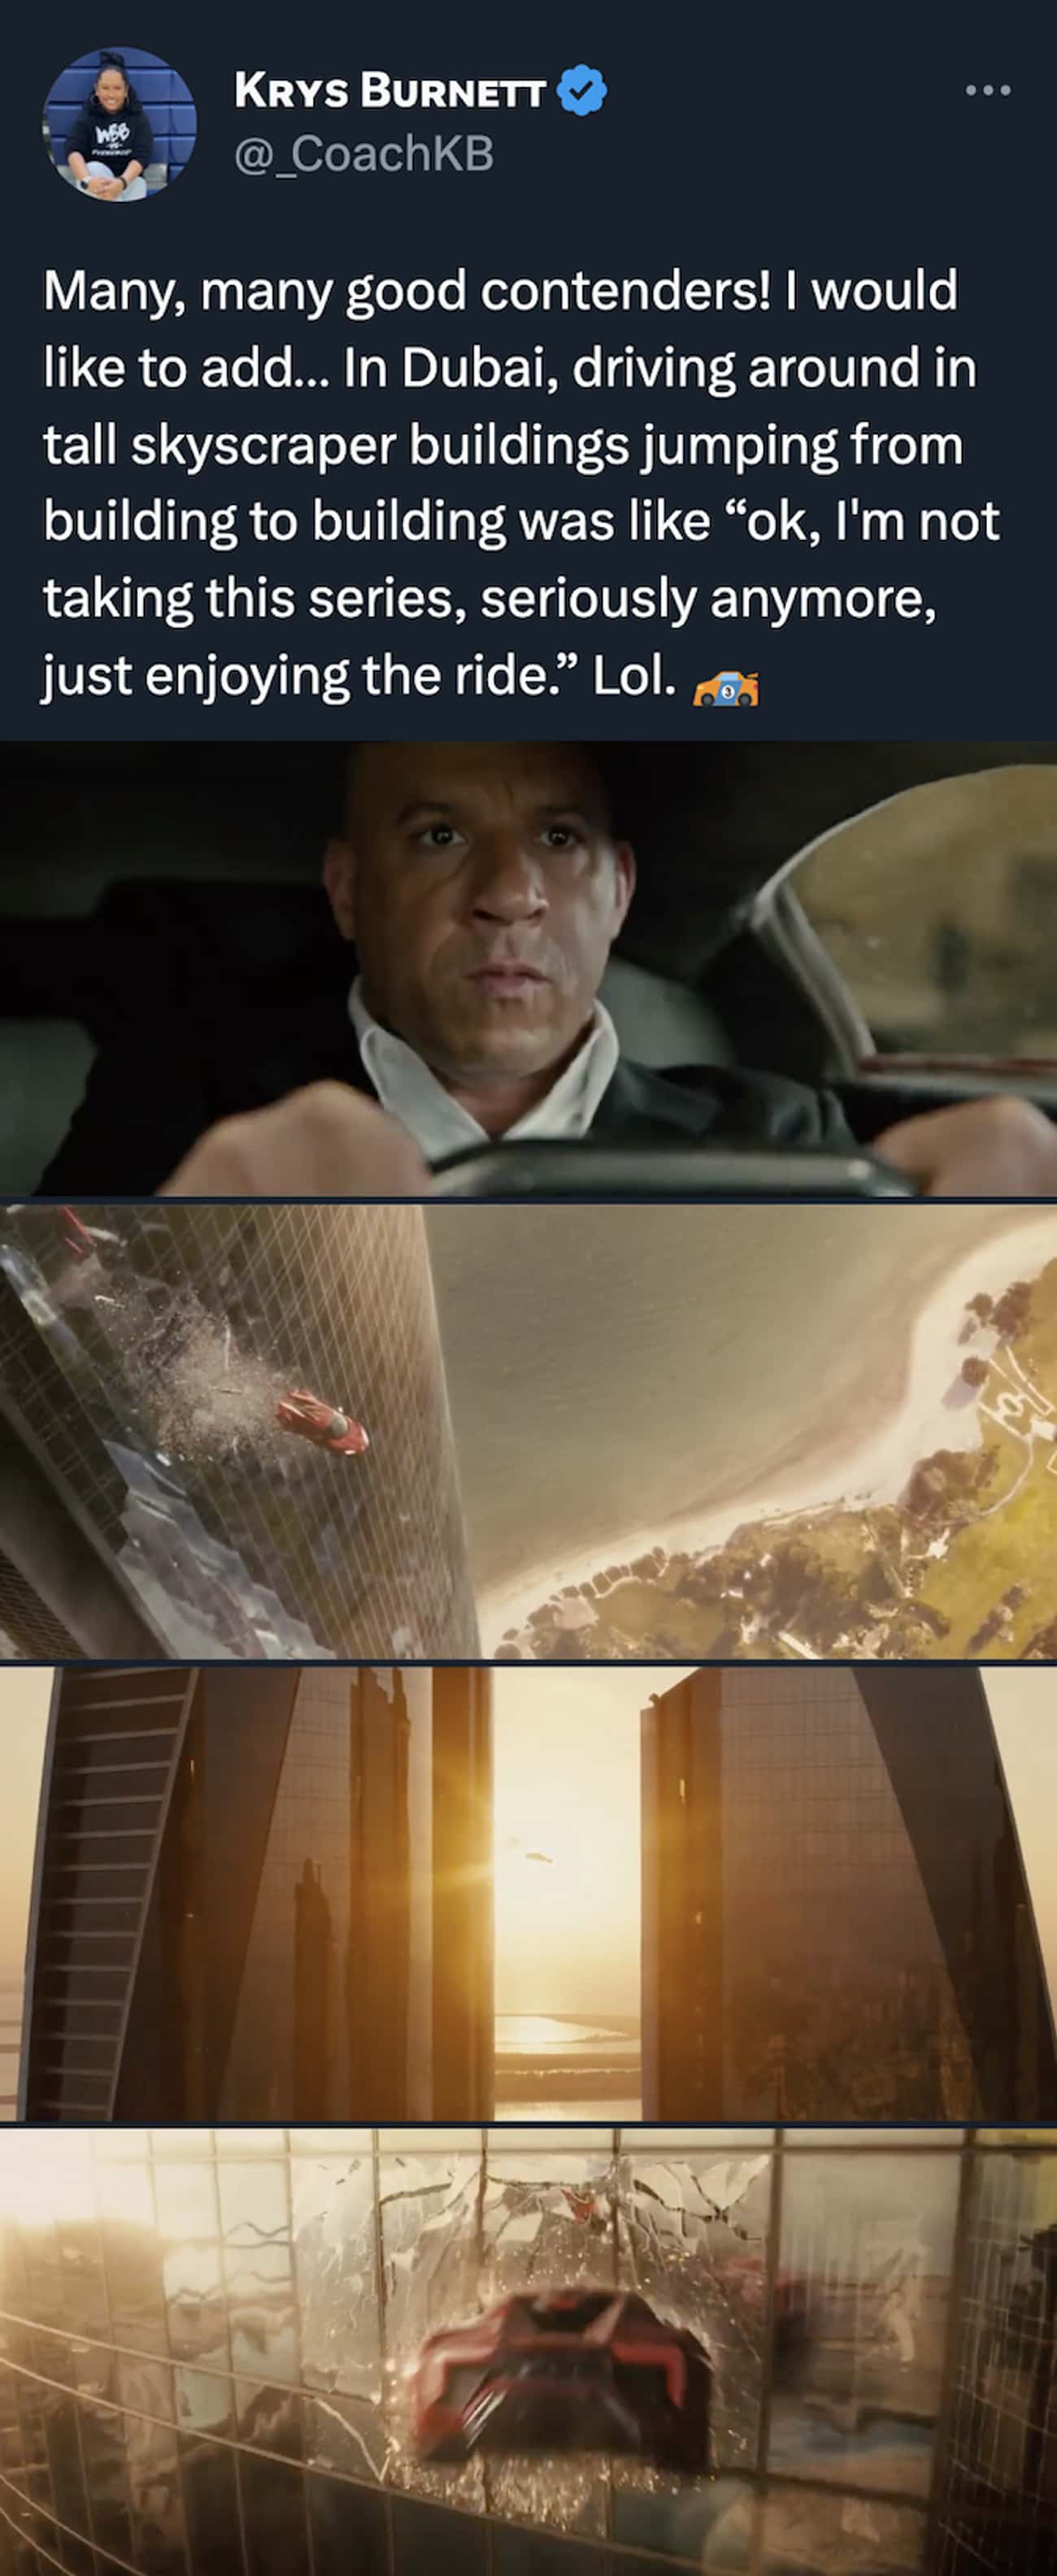 Jumping From Skyscraper To Skyscraper Scene From 'Furious 7'